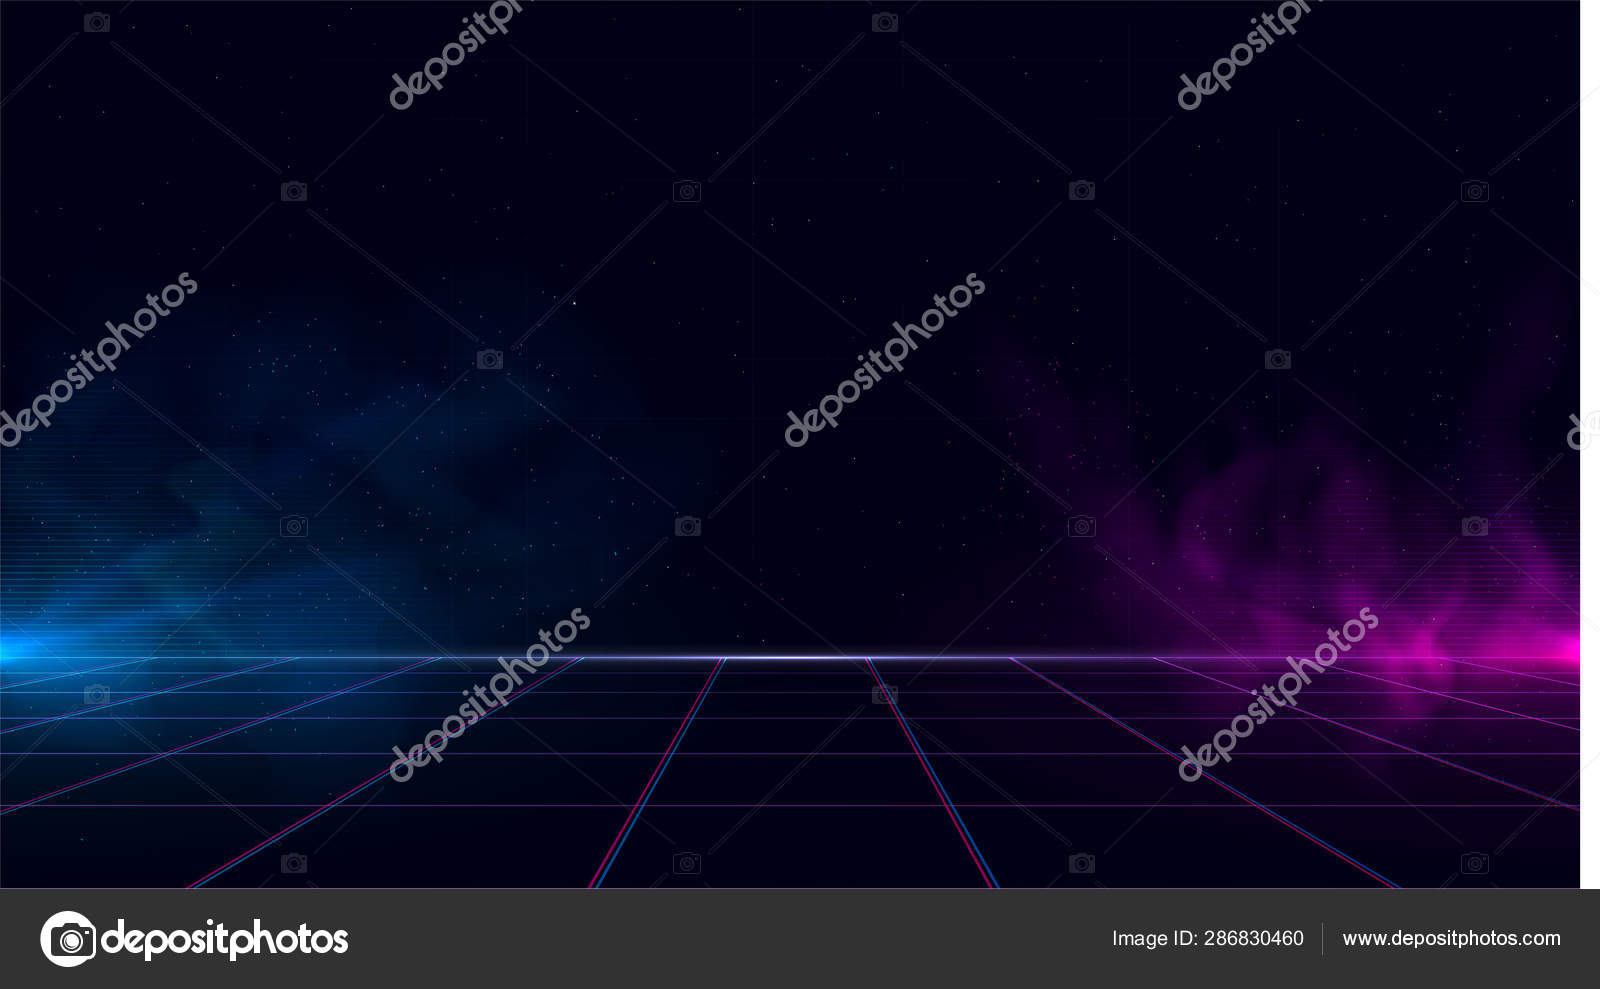 Synthwave Vaporwave Retrowave Cyber Background With Copy Space Laser Grid Starry Sky Blue And Purple Glows With Smoke And Particles Design For Poster Cover Wallpaper Web Banner Etc Vector Image By C